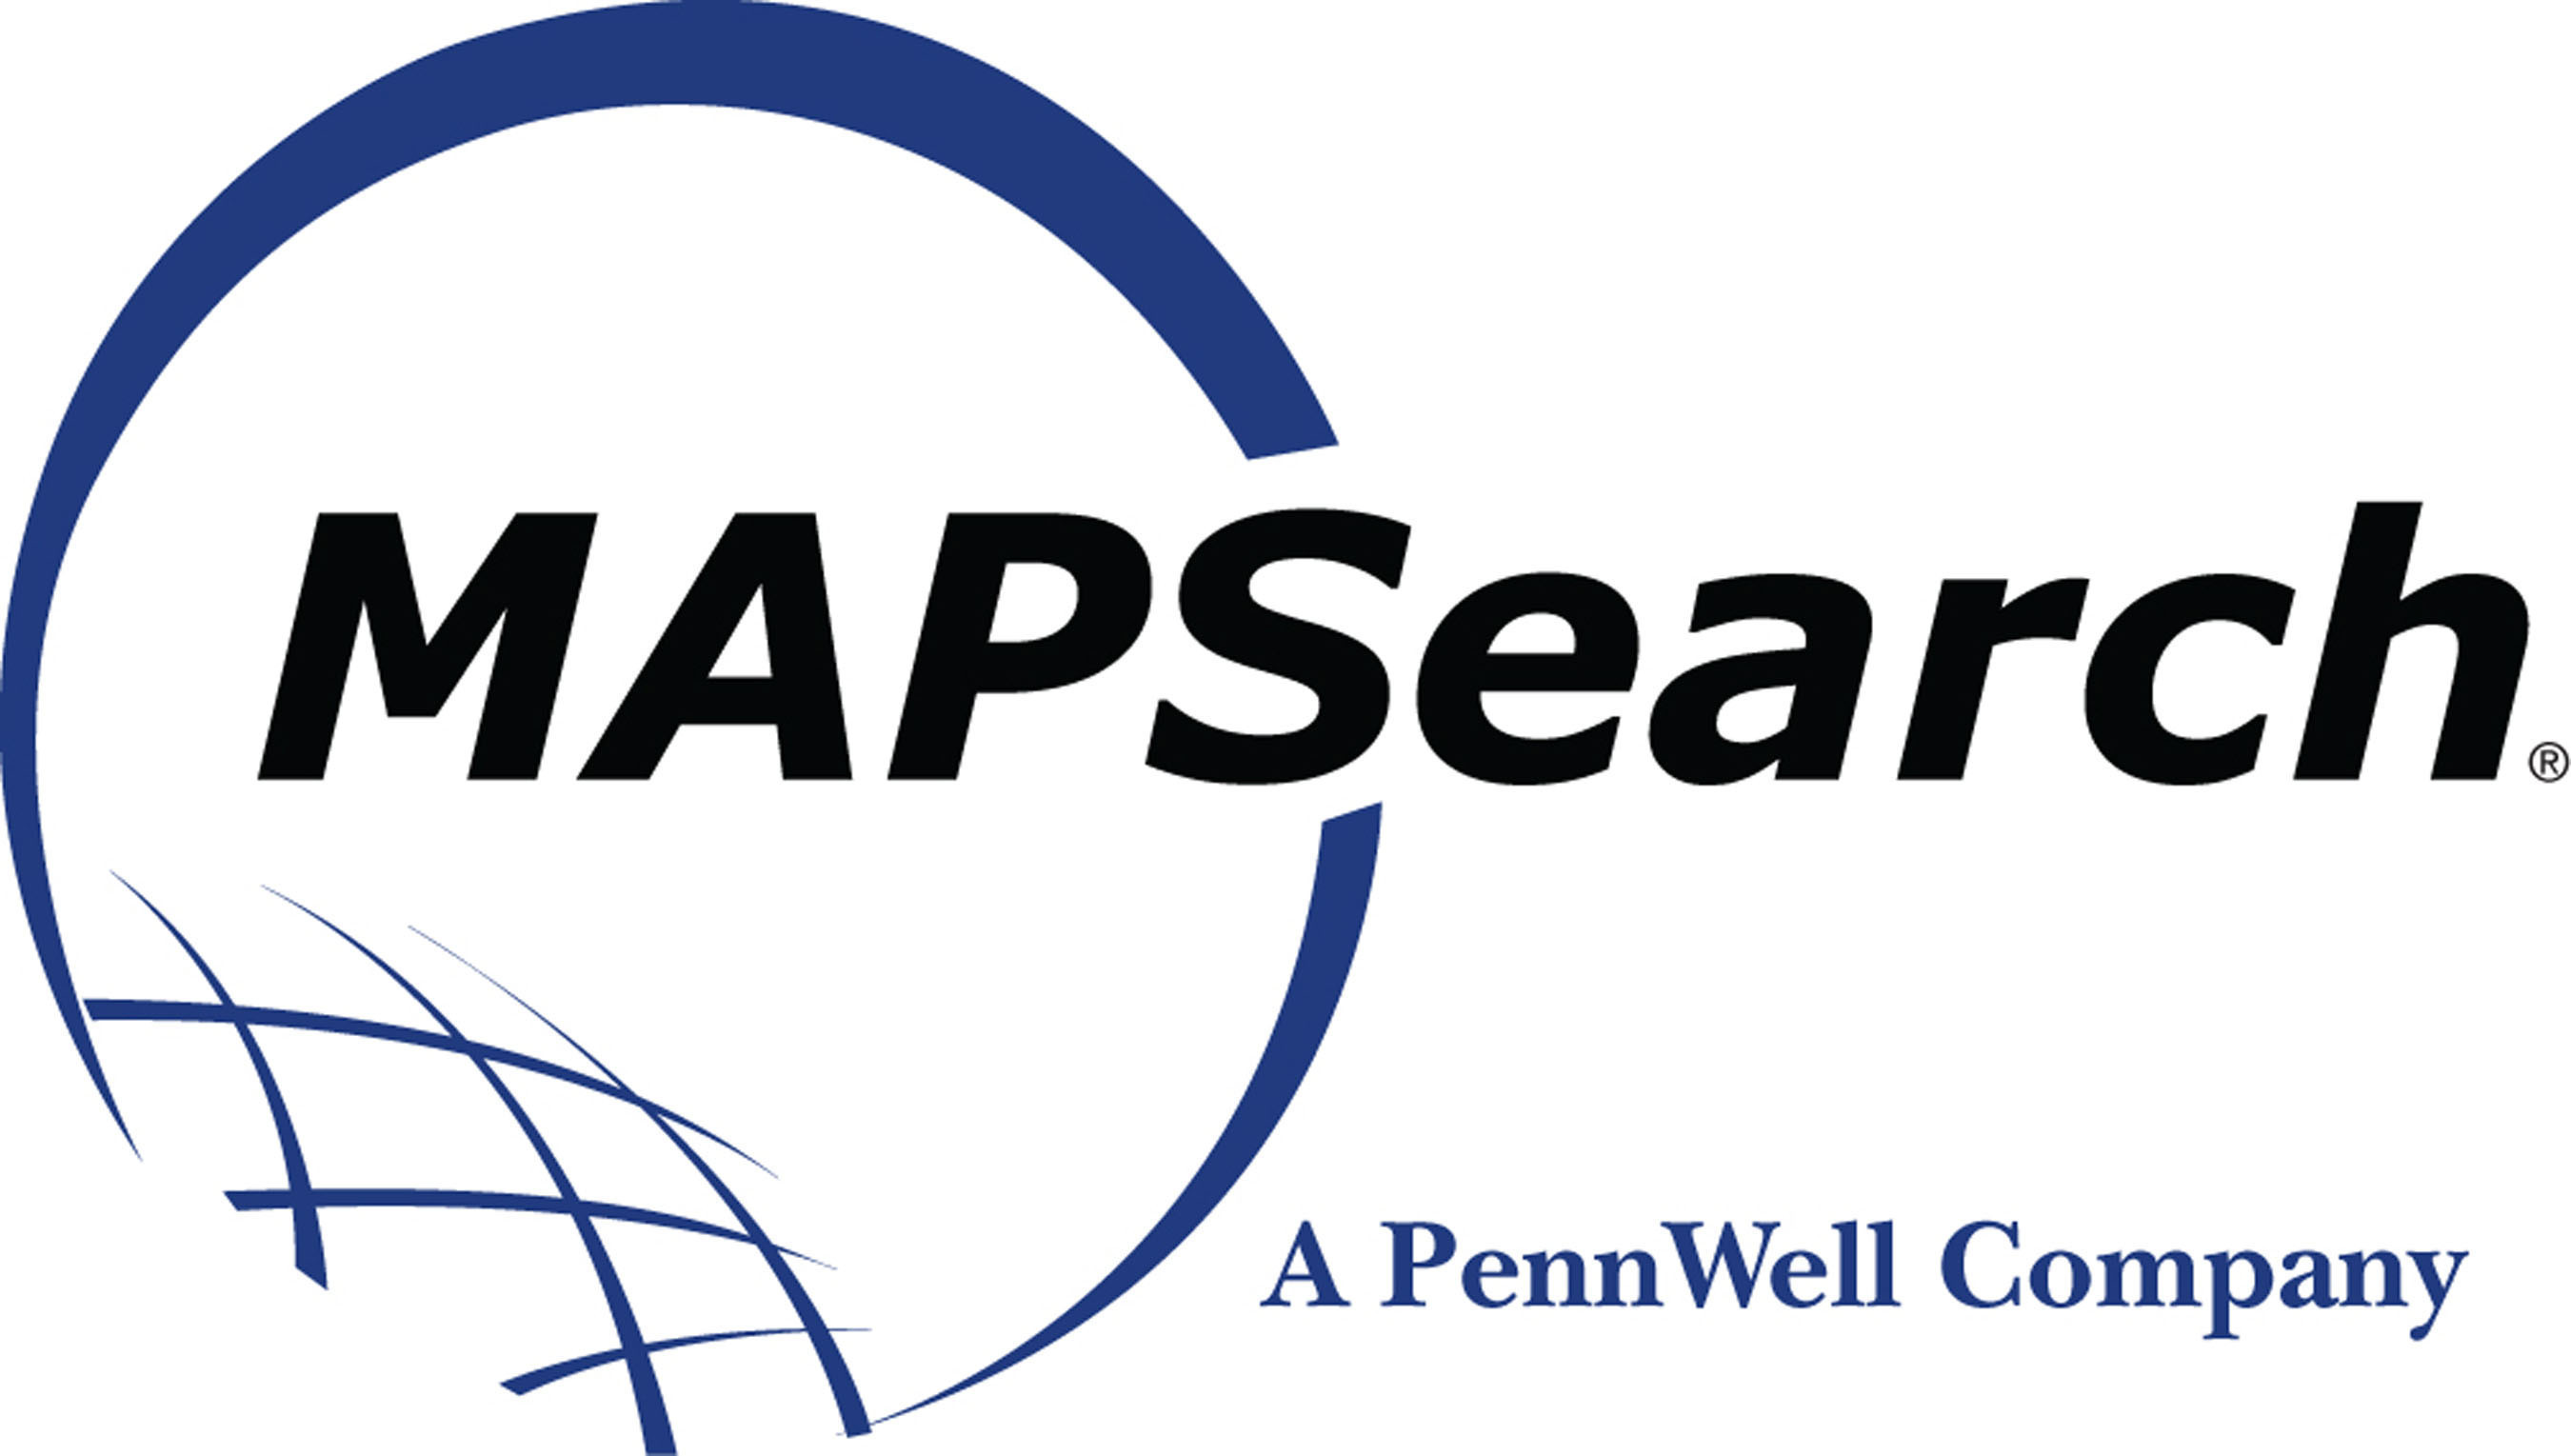 MAPSearch has been providing energy mapping solutions for over 30 years. (PRNewsFoto/PennWell Corporation) (PRNewsFoto/PENNWELL CORPORATION)